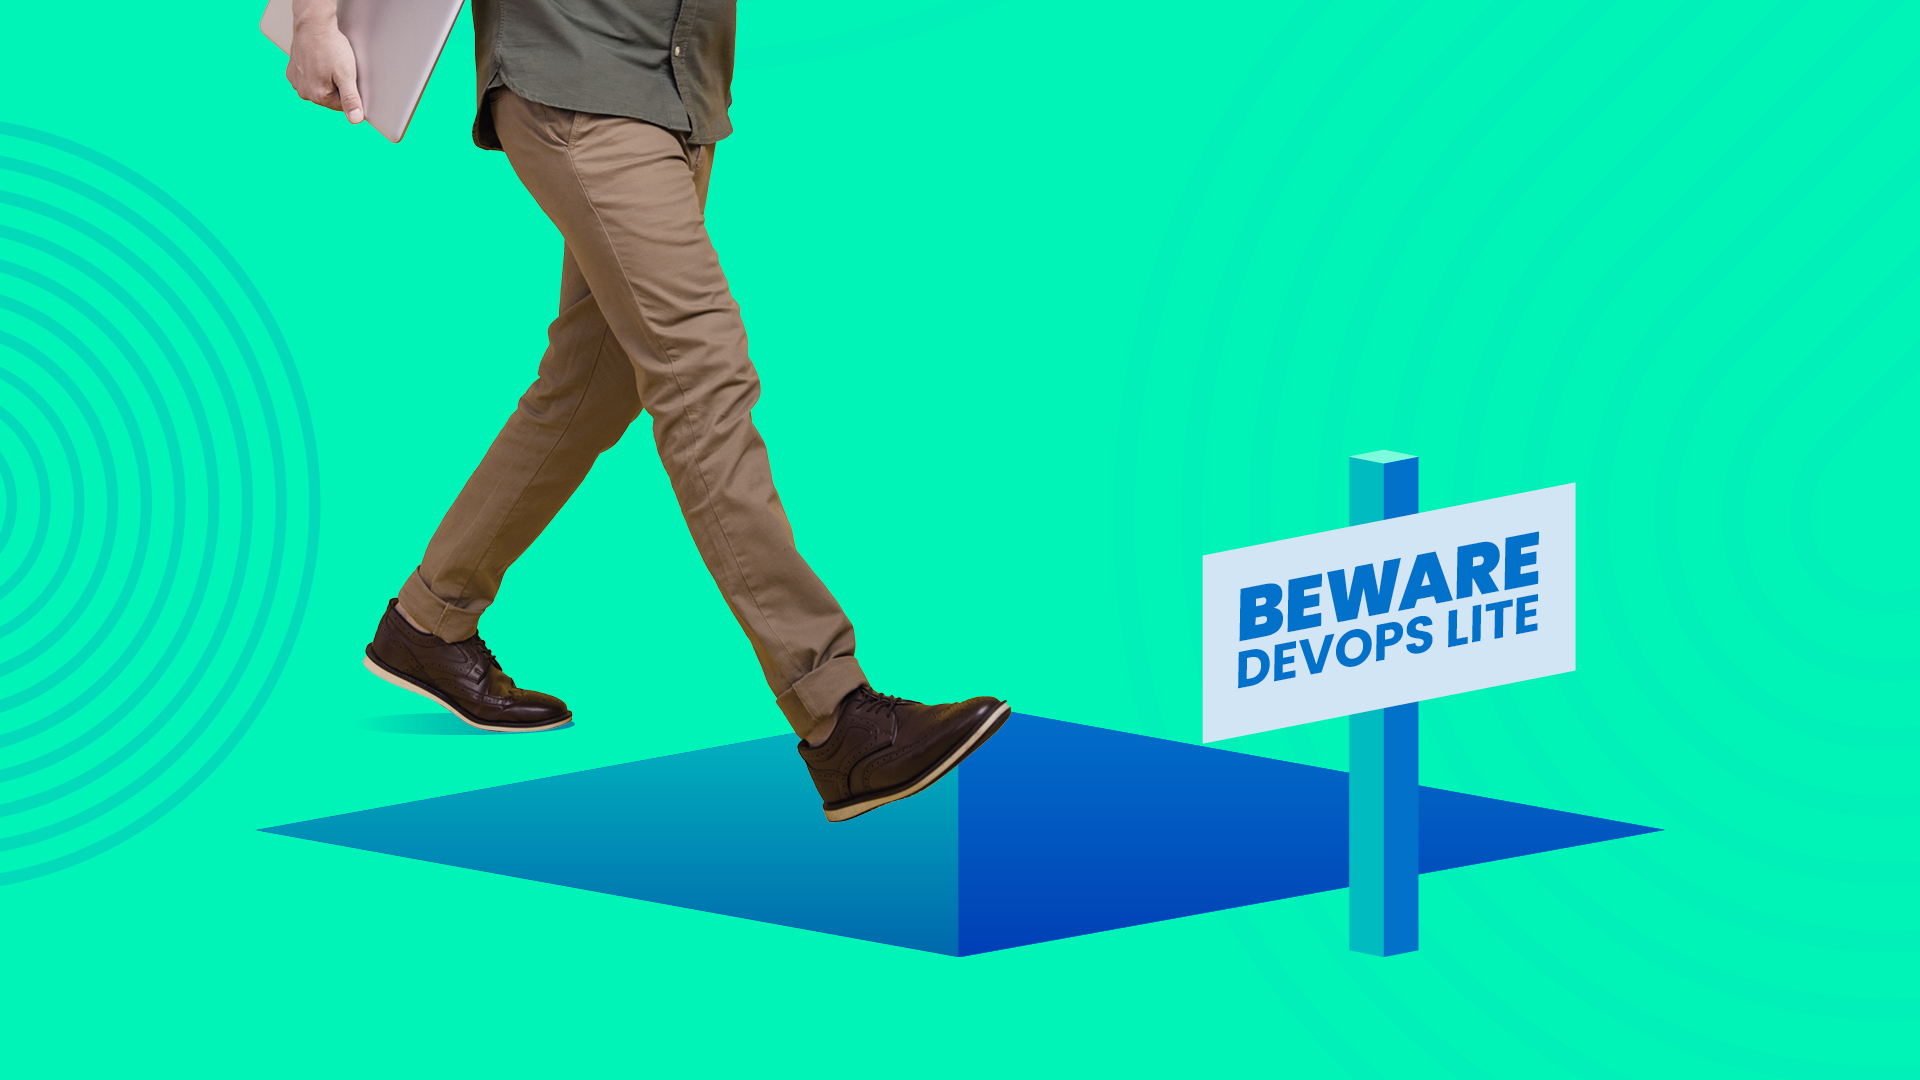 How regulated teams can avoid the DevOps Lite trap with DevOps Change Management